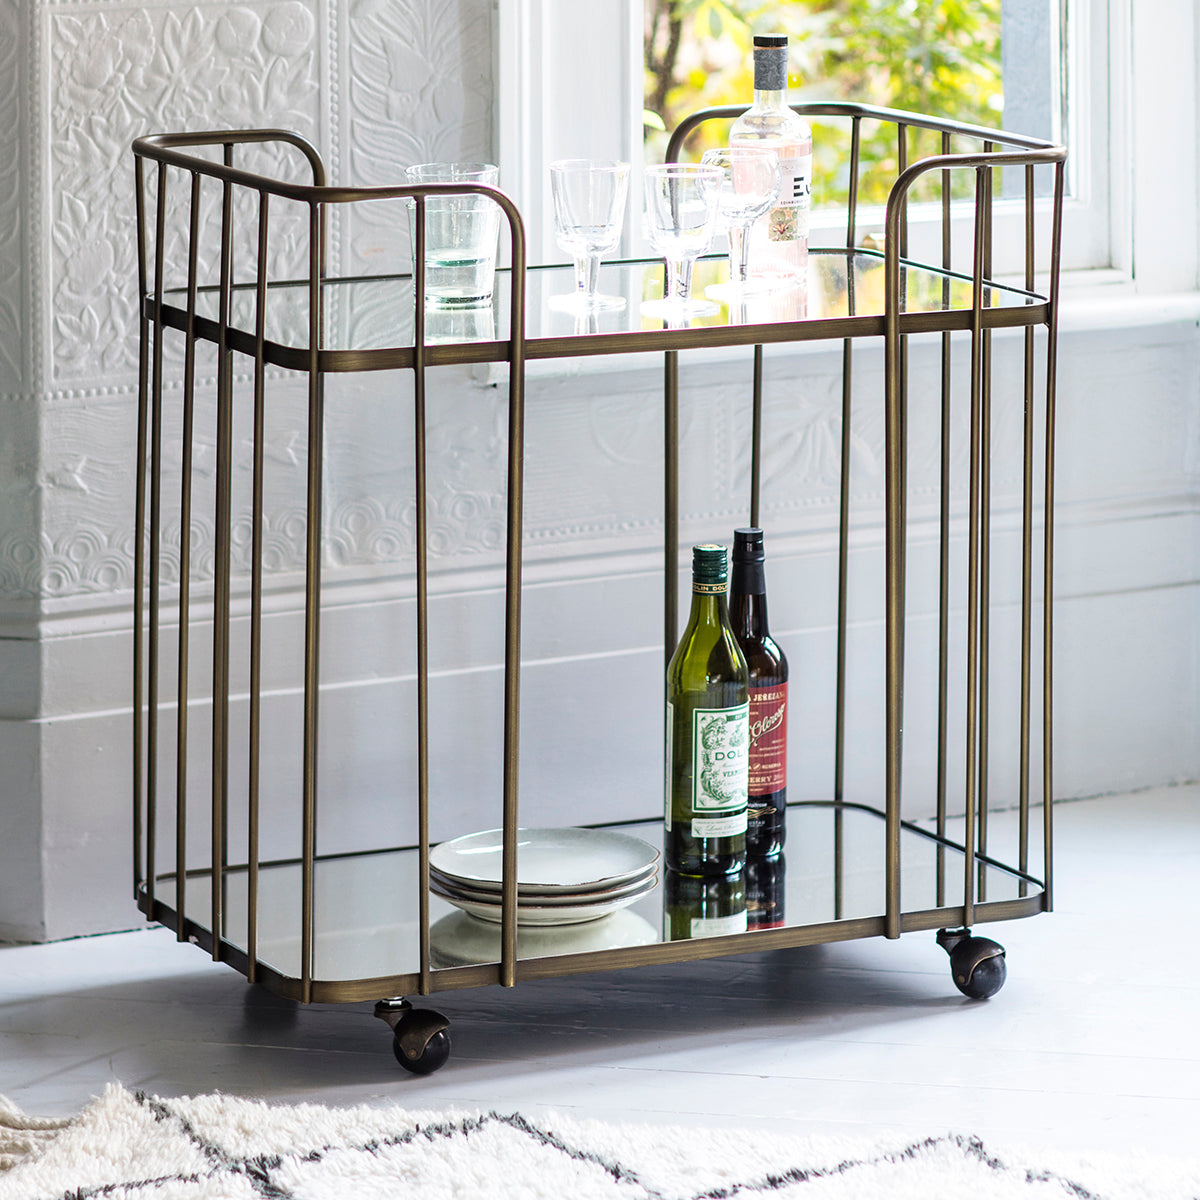 A bronze Verna Drinks Trolley from Kikiathome.co.uk showcasing interior decor with a bottle of wine on top.